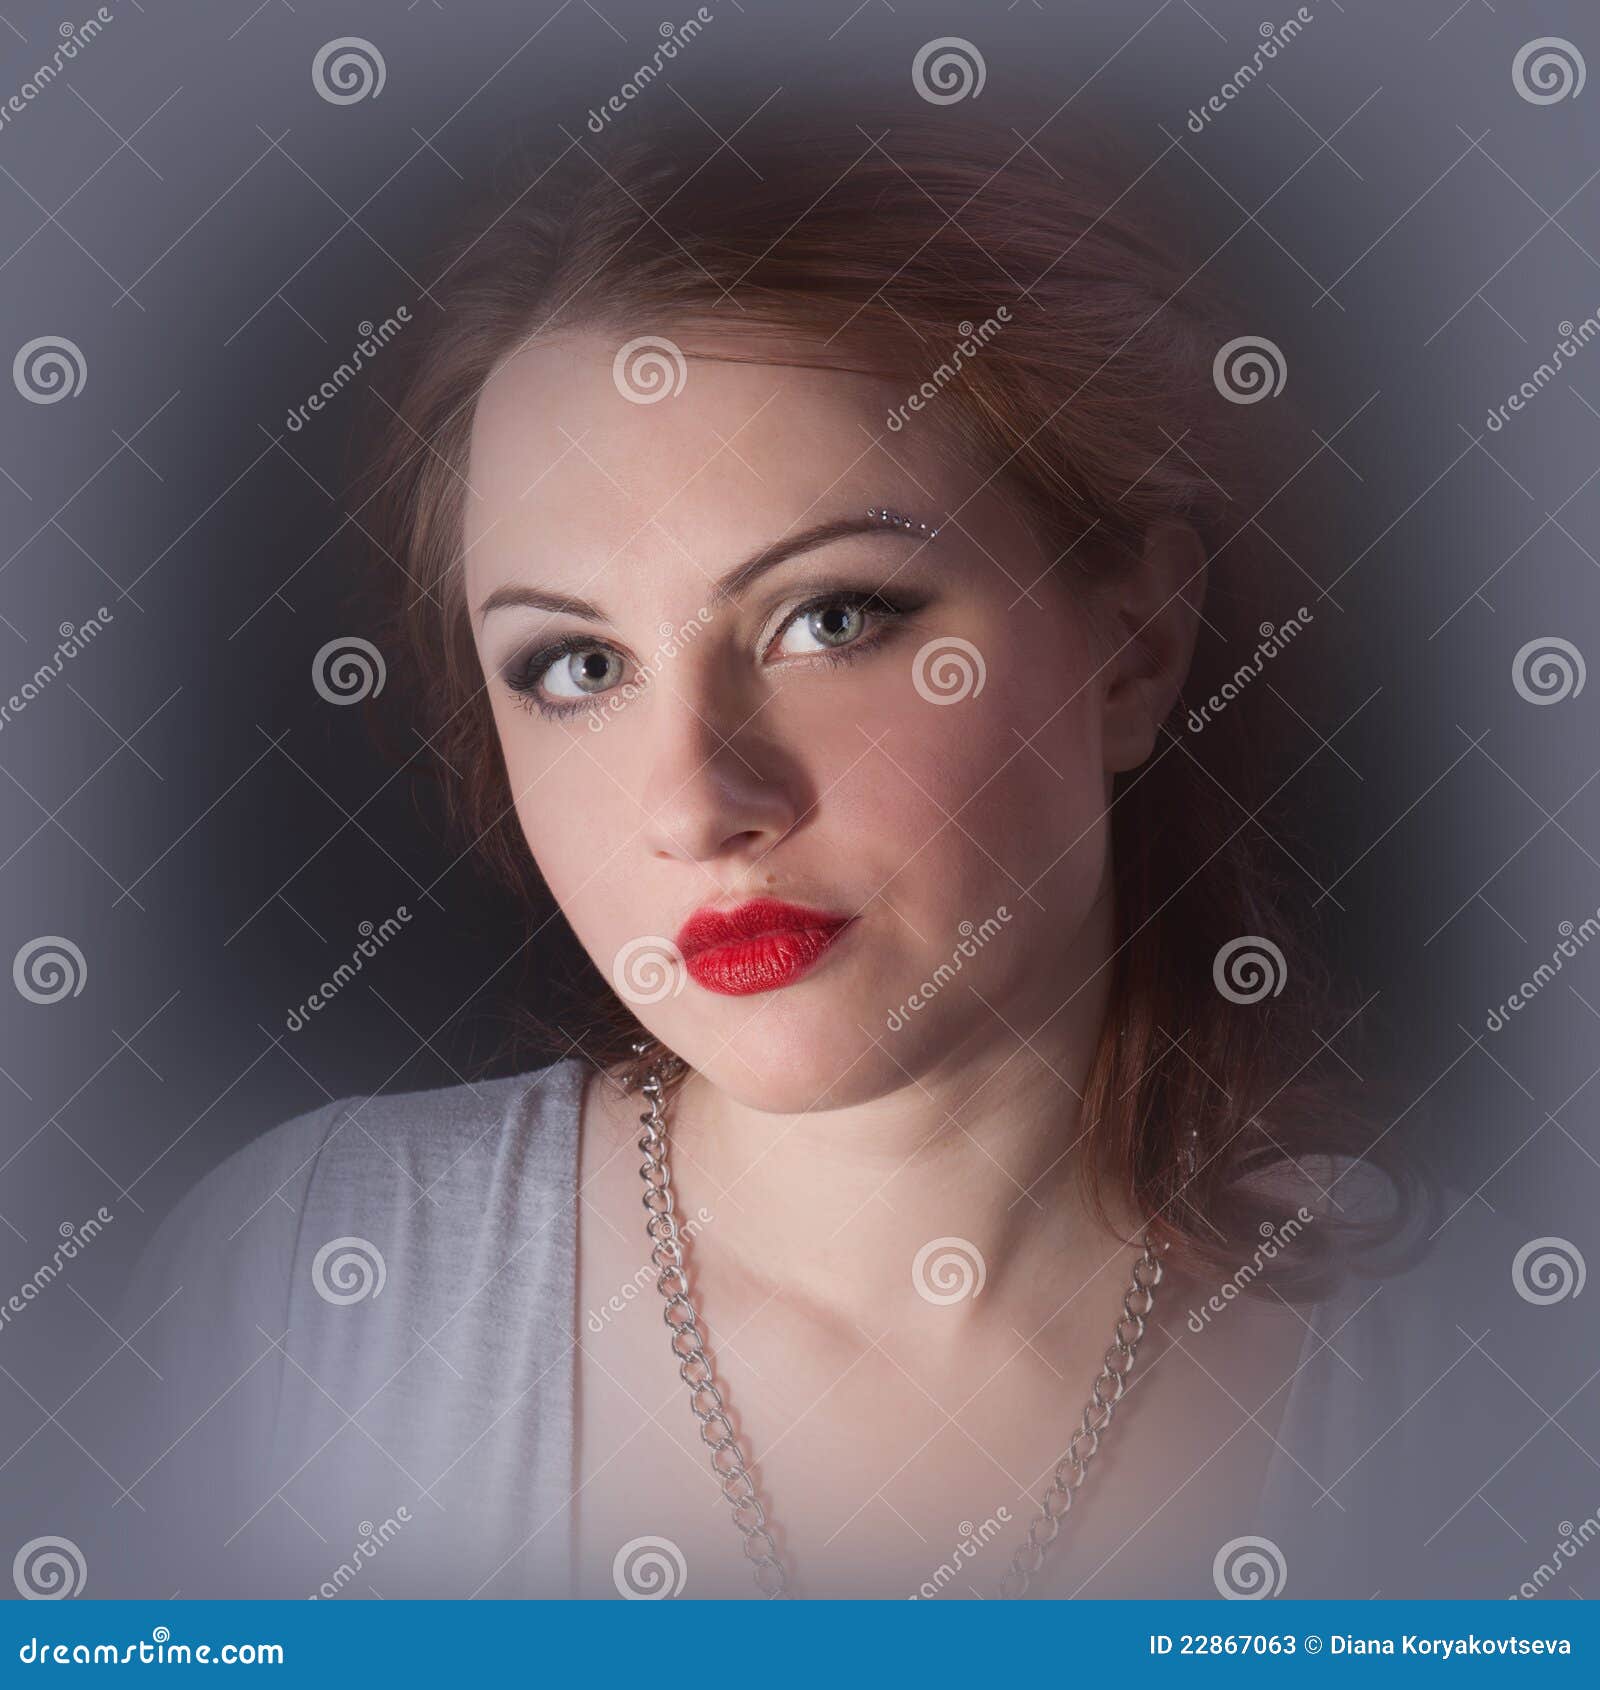 Portrait of a Girl with Red Lips in a Gray Dress Stock Image - Image of ...